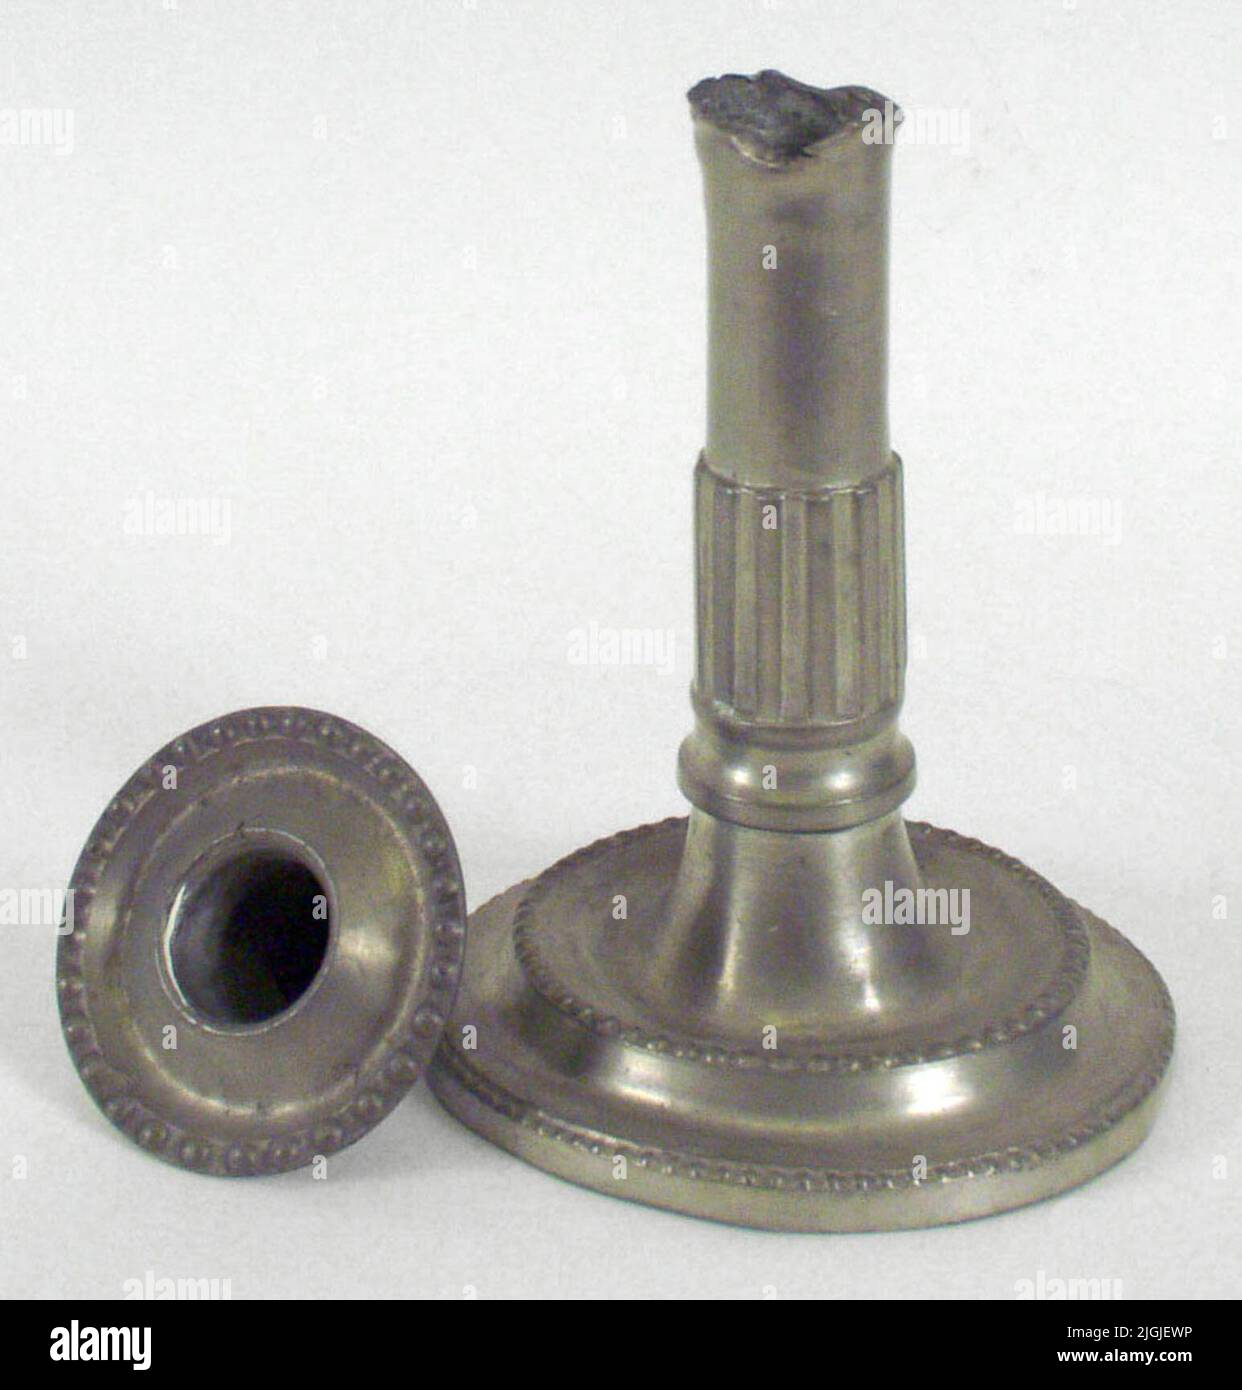 Ljusstake Candlestick of tin, Gustavian. Round foot, profiled with pearl bar ornaments at both profile edges. Cylindrical shaft with a lot of wide grooves. Light cuff fitted with sparse pearl bar. Stamps: Karlskrona city weapons and two master stamps consisting of a ship inside a shield and around the mast the letters AE. The yearbook Stave G2. Made by Andreas Ekman 1789. Operated in Karlskrona 1798-1800. Stock Photo